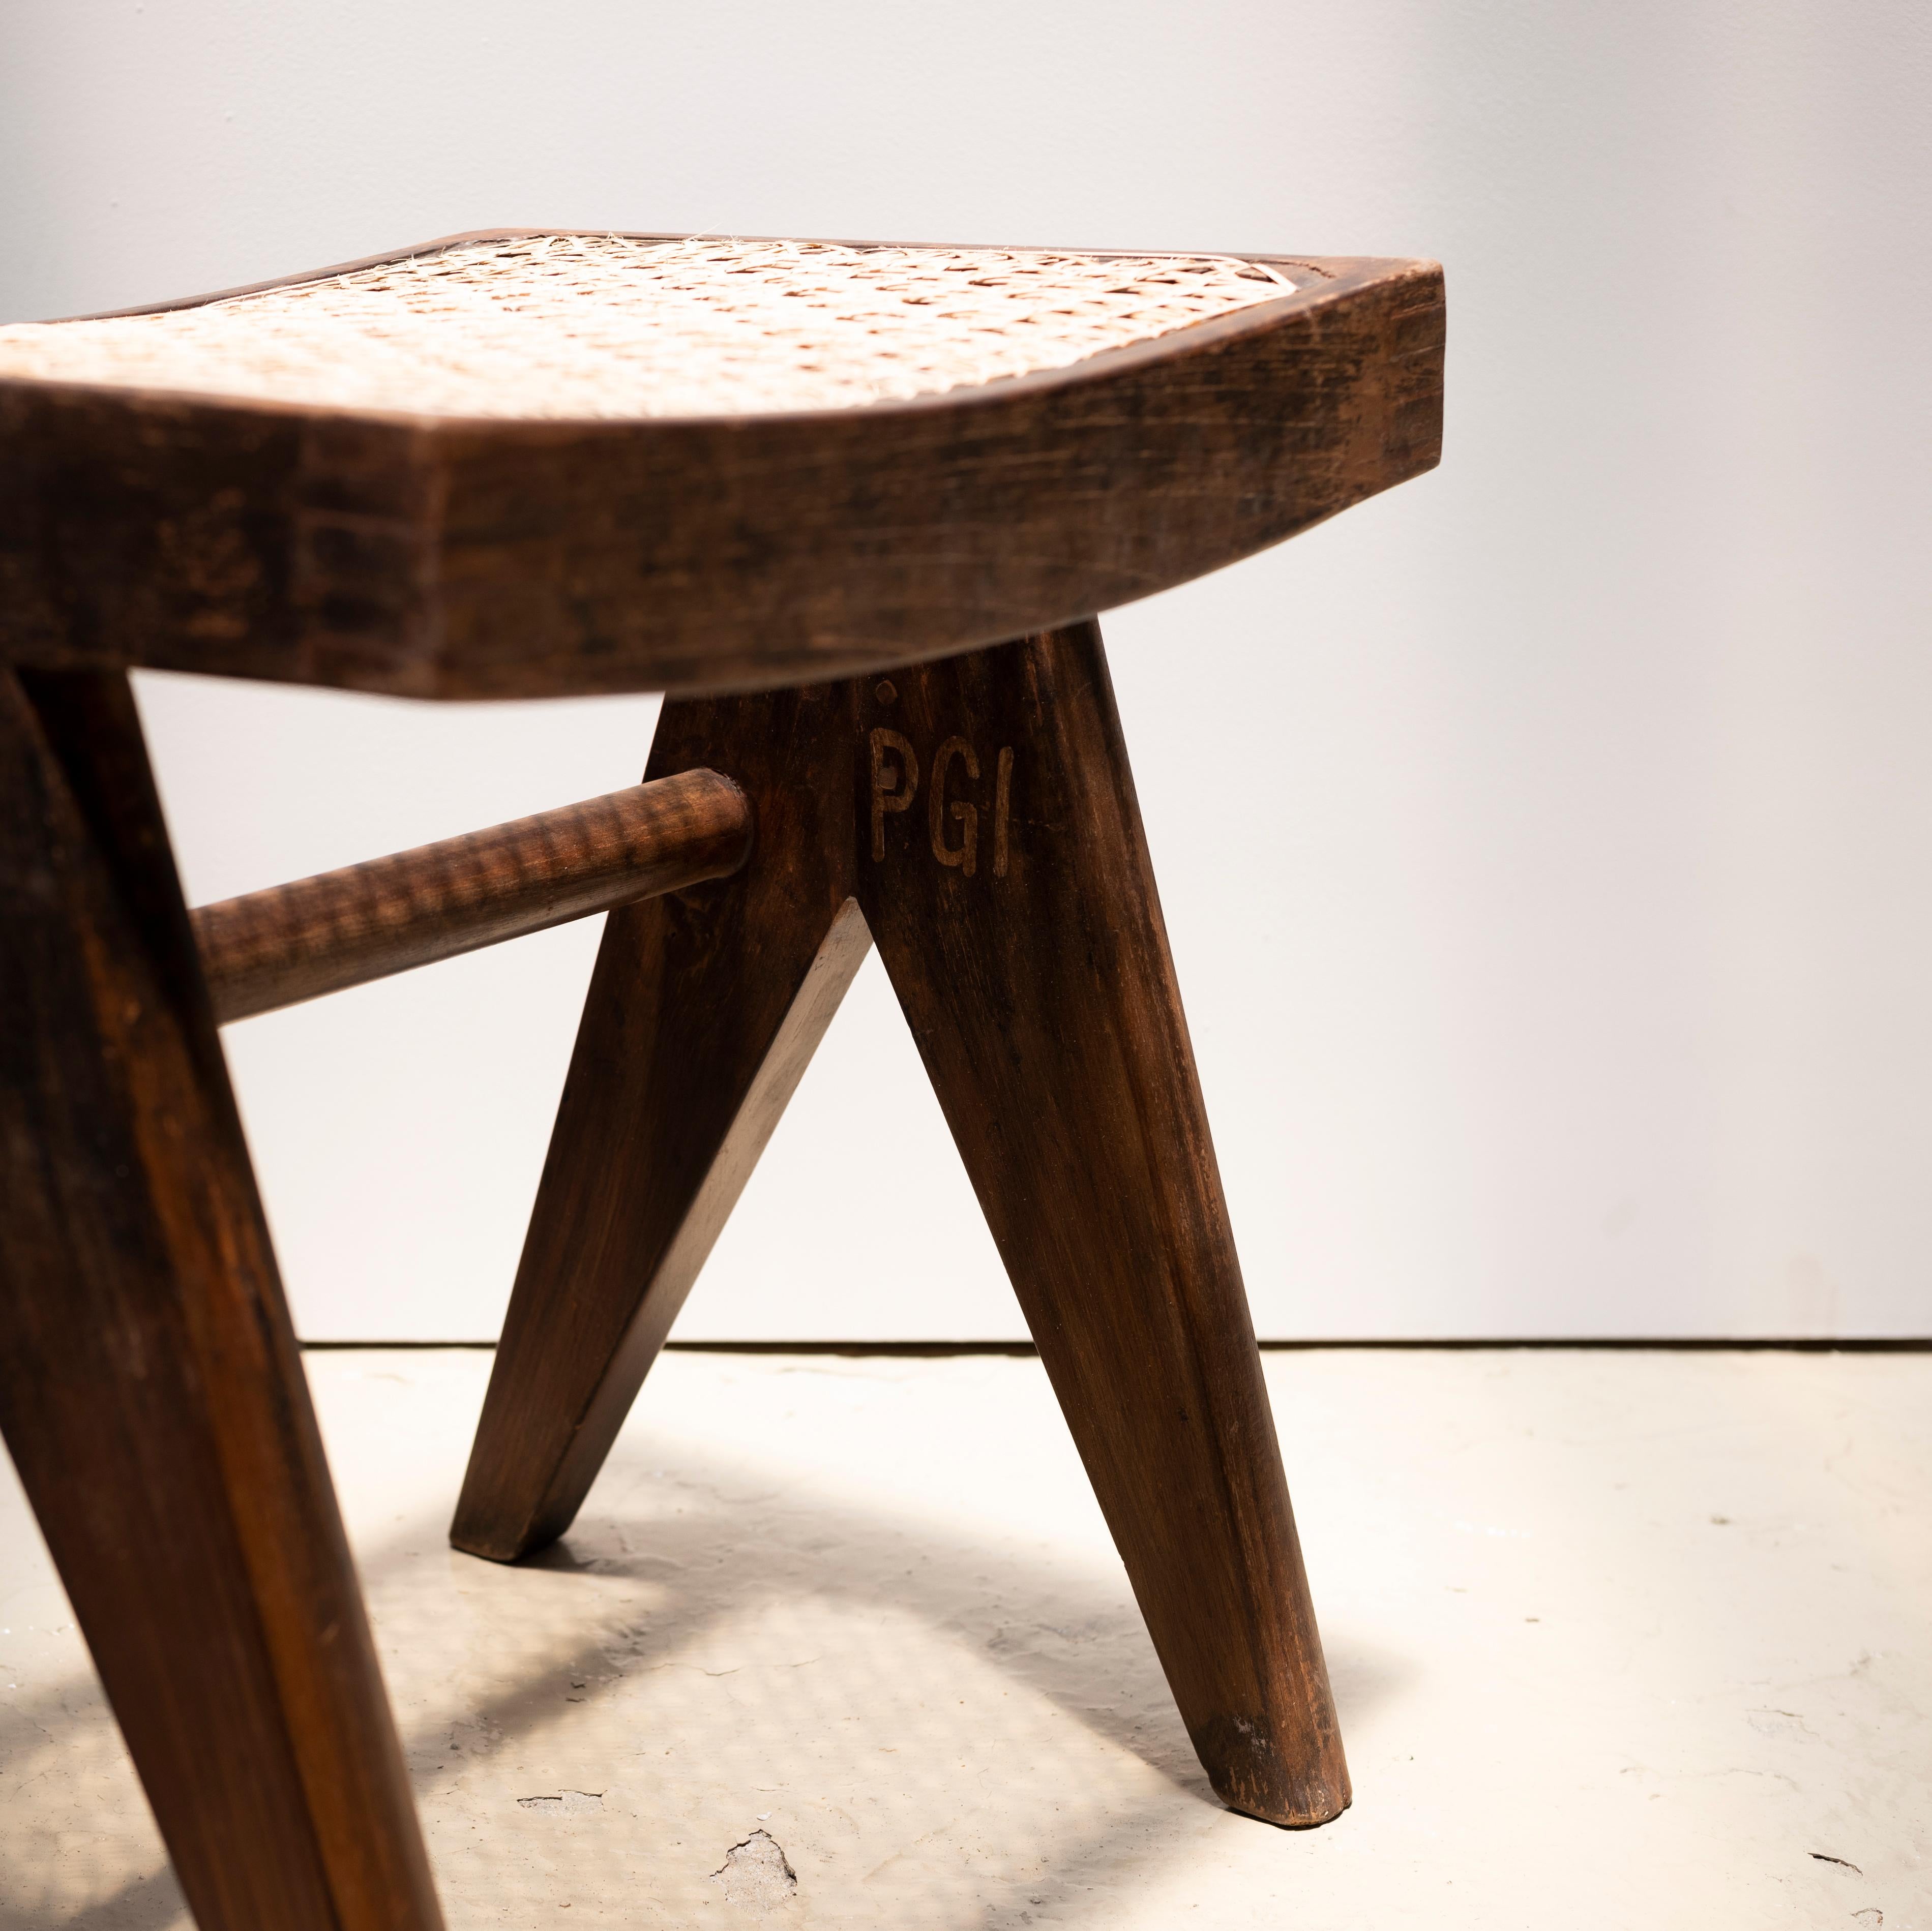 Mid-20th Century Pierre Jeanneret A-Legs Cane Low Stools, Post-Graduate Institute, Chandigarh For Sale